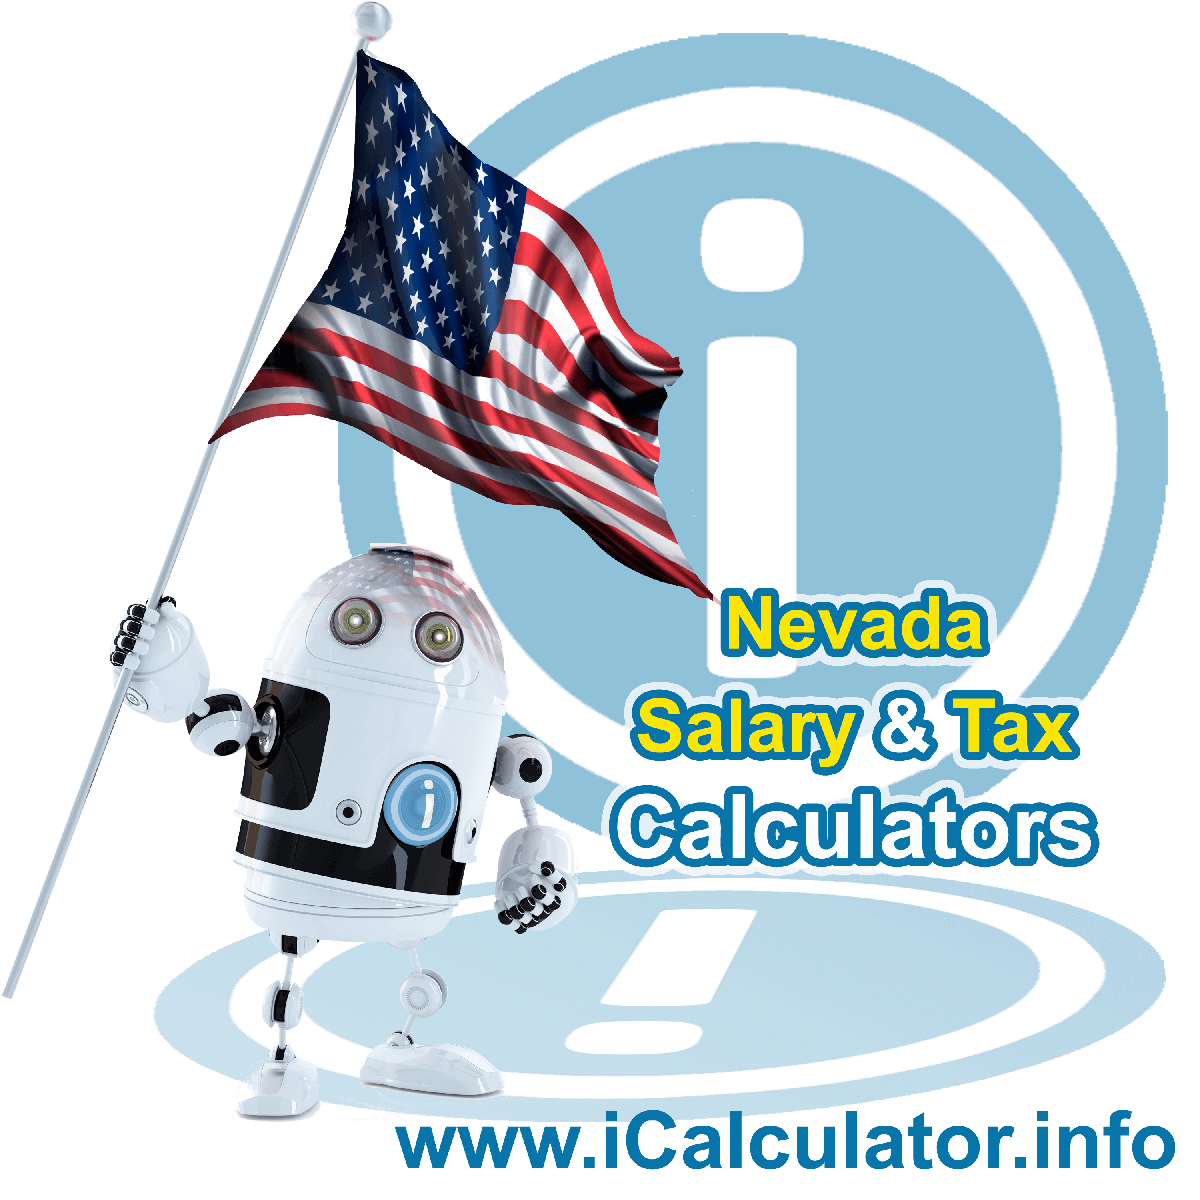 Nevada Salary Calculator 2022 | iCalculator™ | The Nevada Salary Calculator allows you to quickly calculate your salary after tax including Nevada State Tax, Federal State Tax, Medicare Deductions, Social Security, Capital Gains and other income tax and salary deductions complete with supporting Nevada state tax tables 